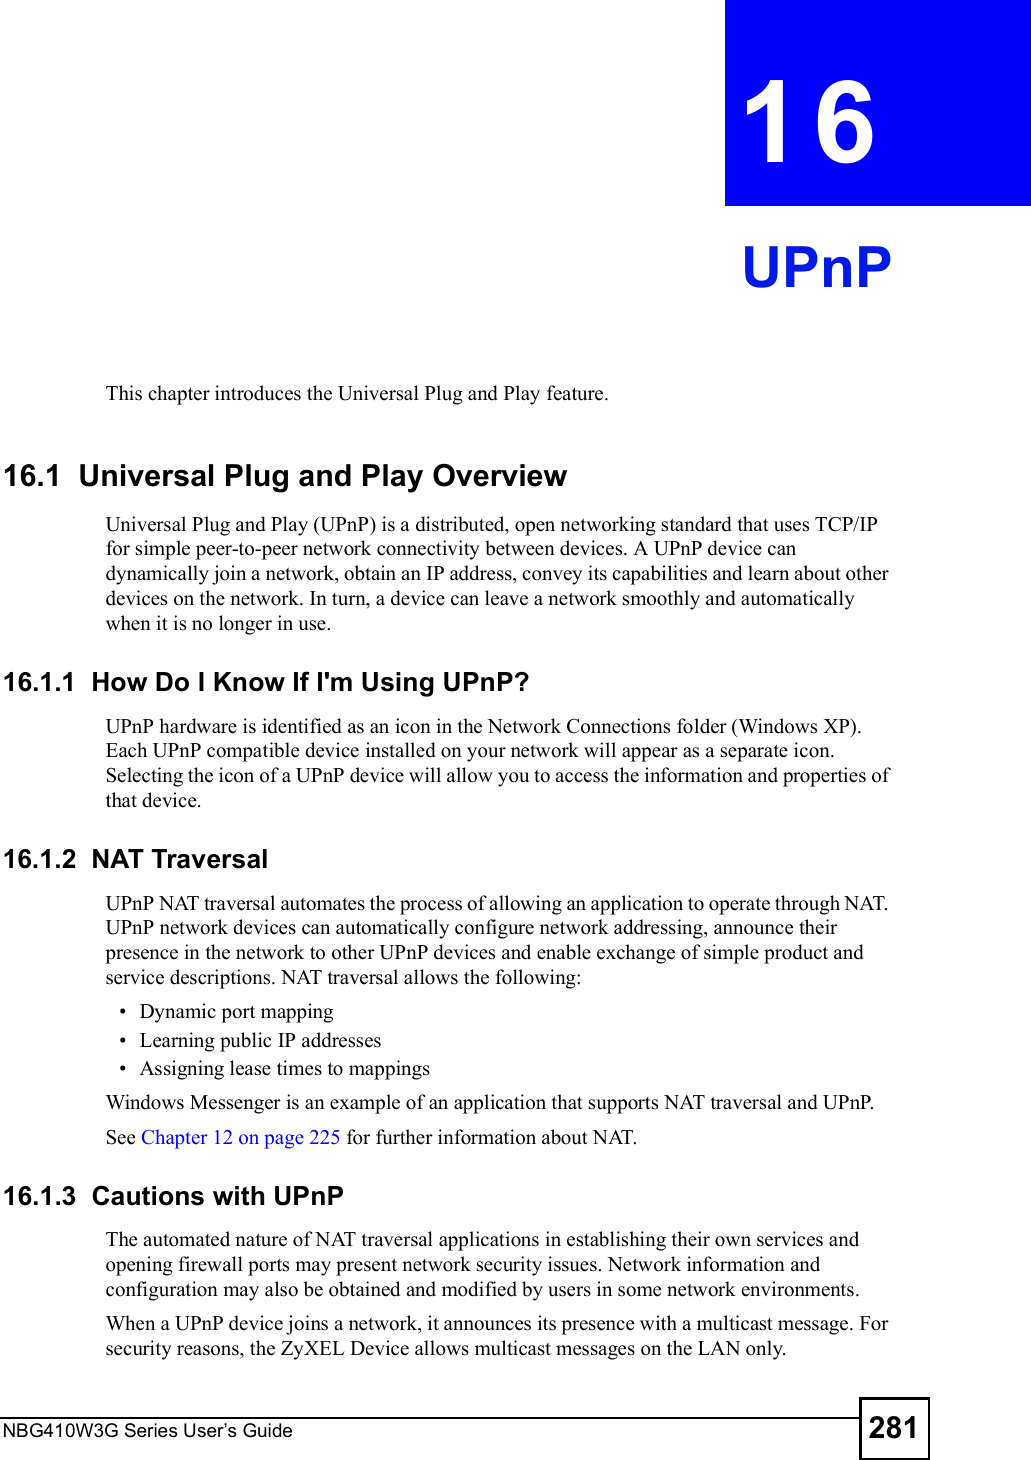 NBG410W3G Series User s Guide 281CHAPTER  16 UPnPThis chapter introduces the Universal Plug and Play feature.16.1  Universal Plug and Play Overview Universal Plug and Play (UPnP) is a distributed, open networking standard that uses TCP/IP for simple peer-to-peer network connectivity between devices. A UPnP device can dynamically join a network, obtain an IP address, convey its capabilities and learn about other devices on the network. In turn, a device can leave a network smoothly and automatically when it is no longer in use.16.1.1  How Do I Know If I&apos;m Using UPnP?UPnP hardware is identified as an icon in the Network Connections folder (Windows XP). Each UPnP compatible device installed on your network will appear as a separate icon. Selecting the icon of a UPnP device will allow you to access the information and properties of that device. 16.1.2  NAT TraversalUPnP NAT traversal automates the process of allowing an application to operate through NAT. UPnP network devices can automatically configure network addressing, announce their presence in the network to other UPnP devices and enable exchange of simple product and service descriptions. NAT traversal allows the following: Dynamic port mapping Learning public IP addresses Assigning lease times to mappingsWindows Messenger is an example of an application that supports NAT traversal and UPnP. See Chapter 12 on page 225 for further information about NAT. 16.1.3  Cautions with UPnPThe automated nature of NAT traversal applications in establishing their own services and opening firewall ports may present network security issues. Network information and configuration may also be obtained and modified by users in some network environments. When a UPnP device joins a network, it announces its presence with a multicast message. For security reasons, the ZyXEL Device allows multicast messages on the LAN only.